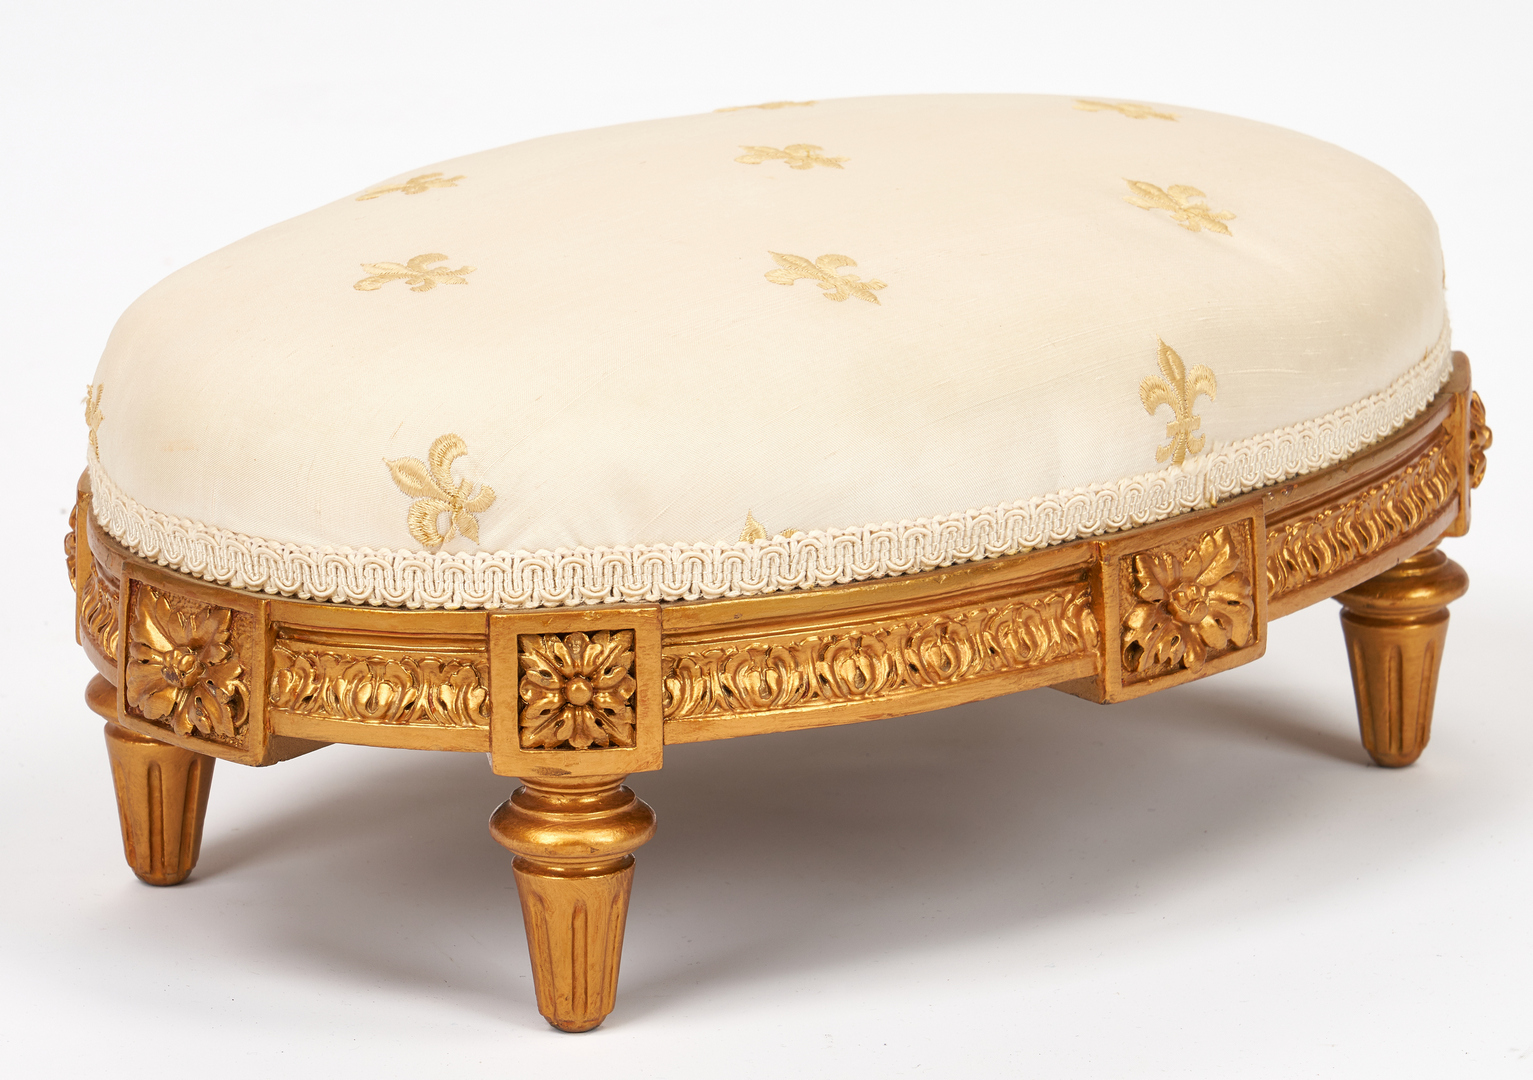 Lot 337: Pair of French Louis XVI Style Fauteuils & Footstool